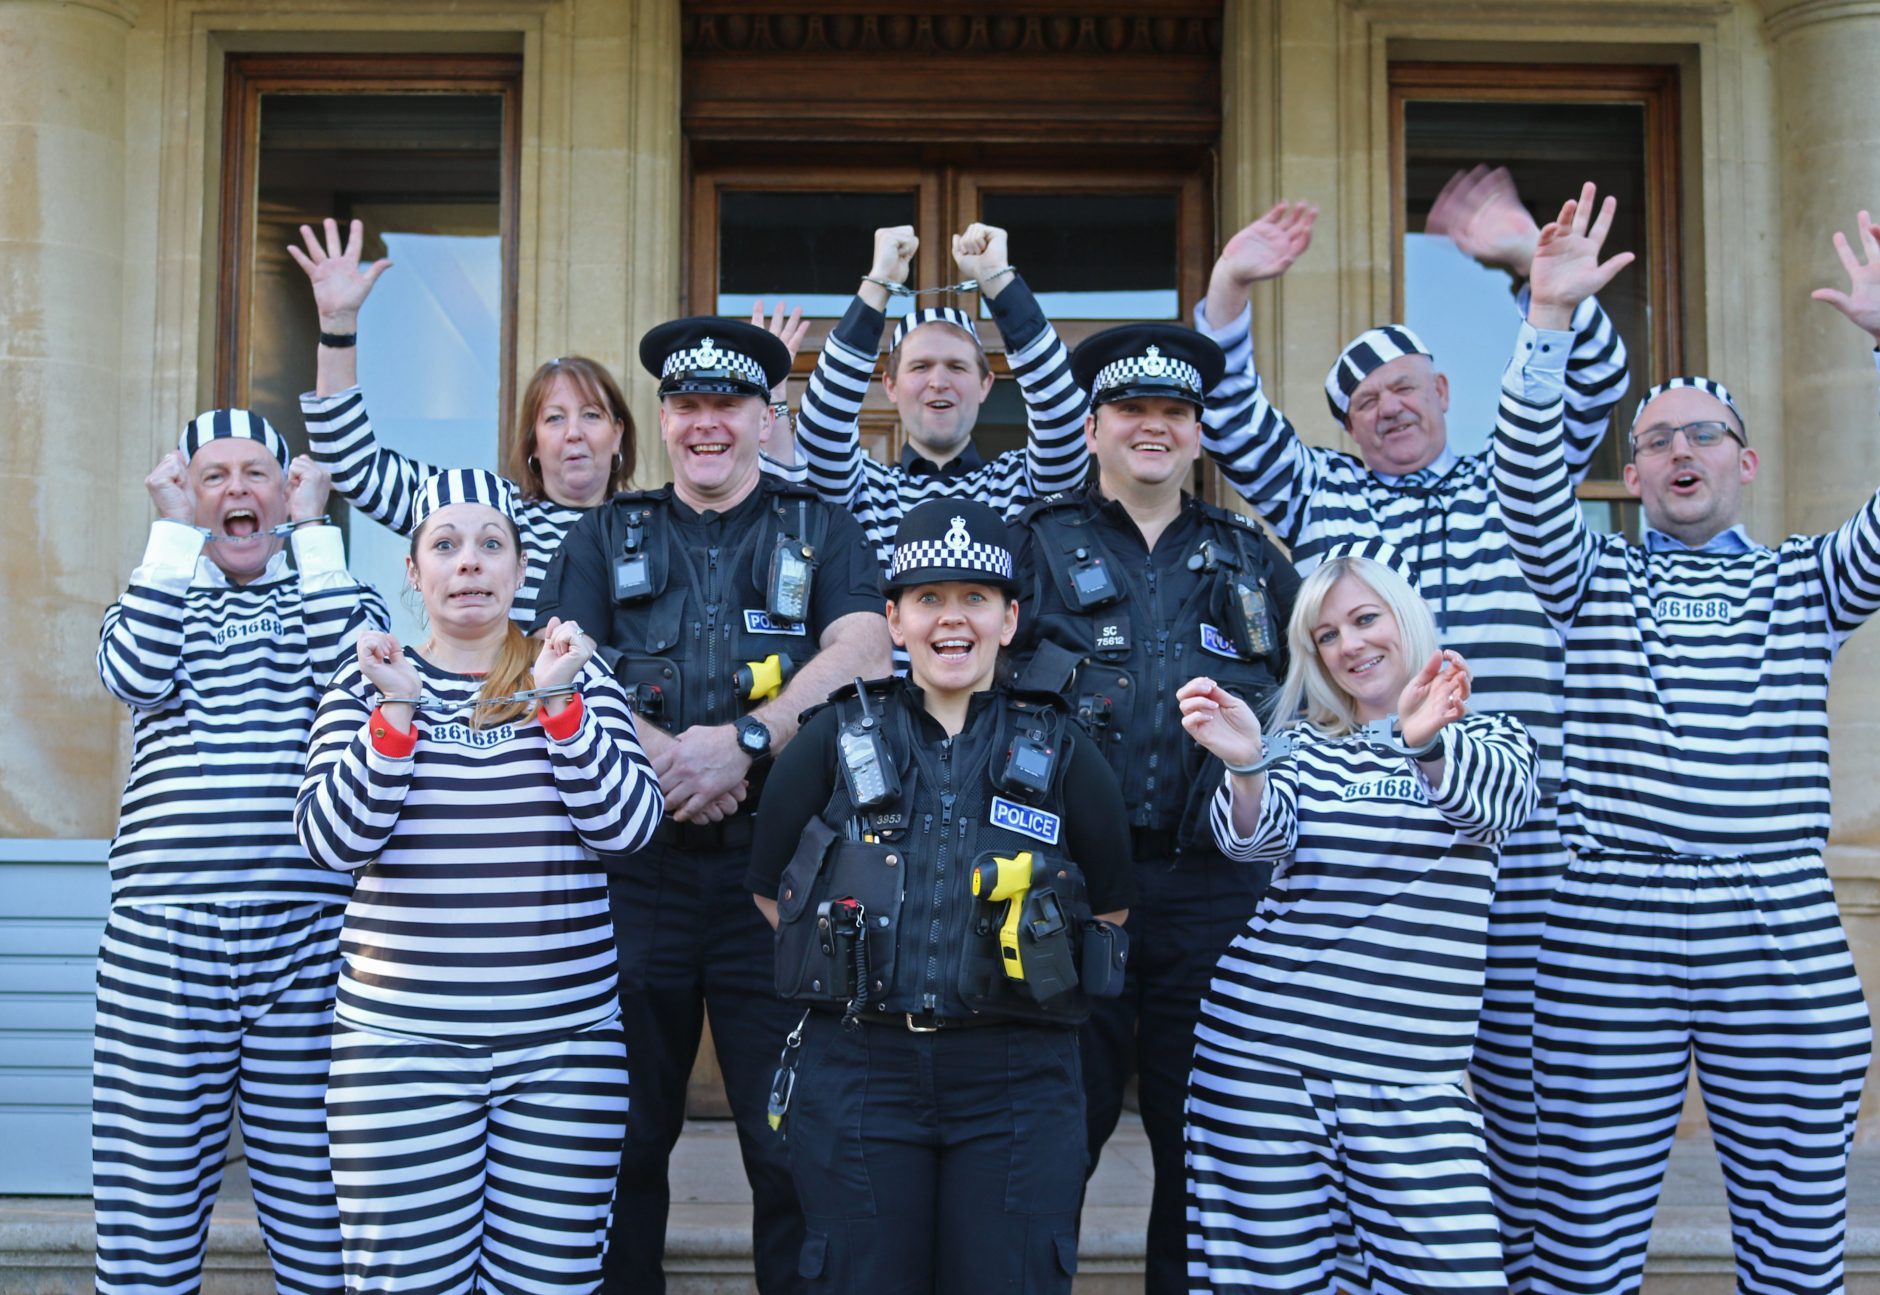 Fundraisers pose as convicts with Devon police officers in aid of Rowcroft.